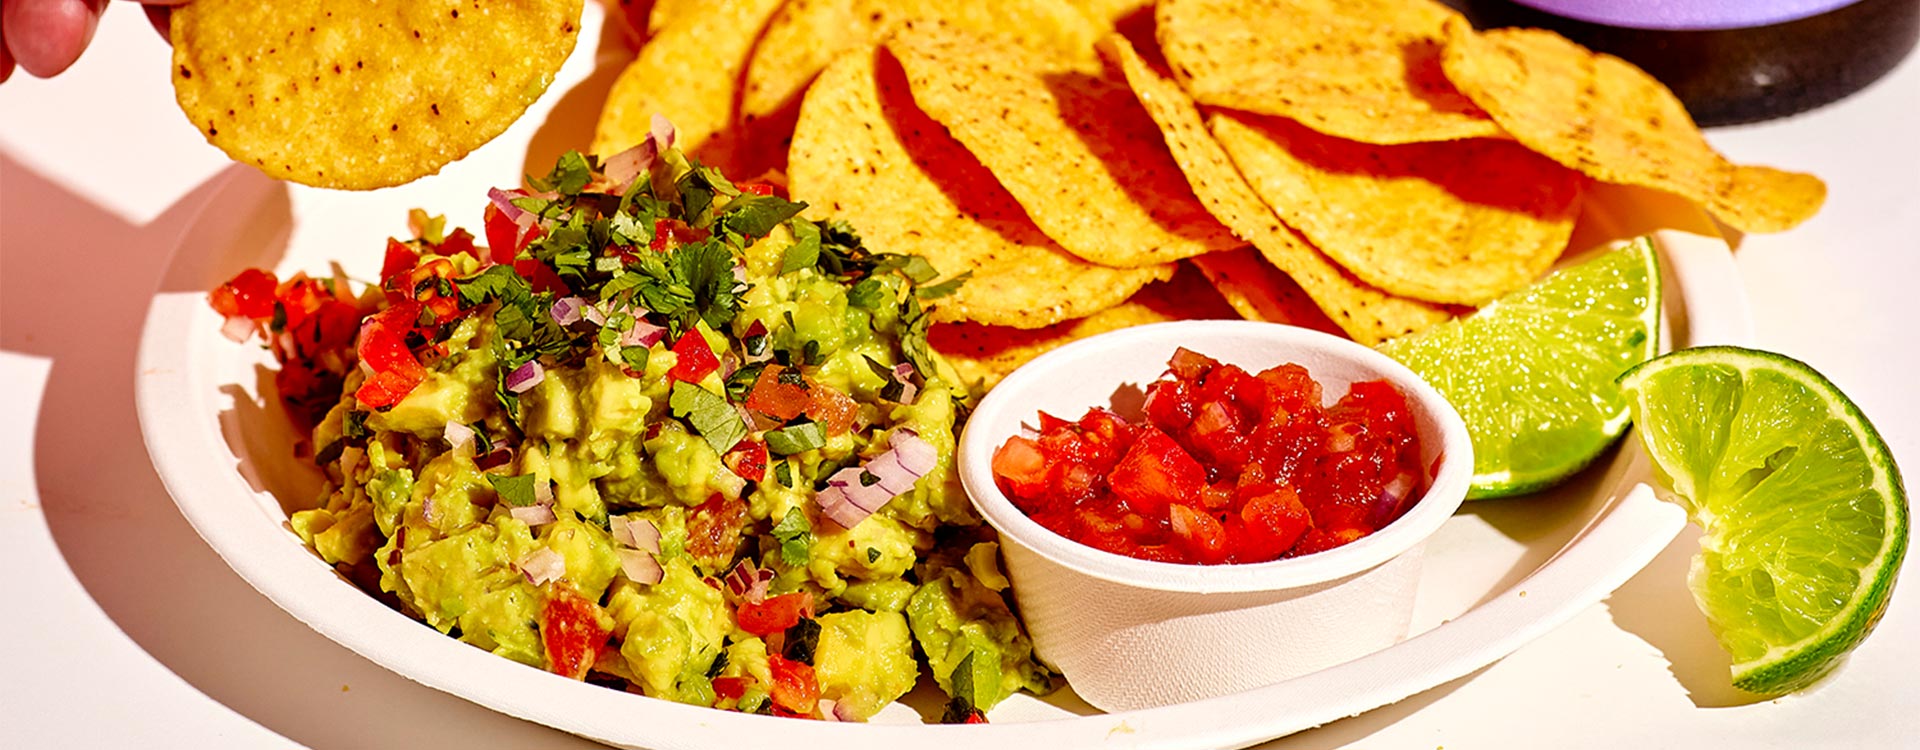 Renowned for their creamy texture, perfectly ripe avocados are the basis of this classic Mexican dip!